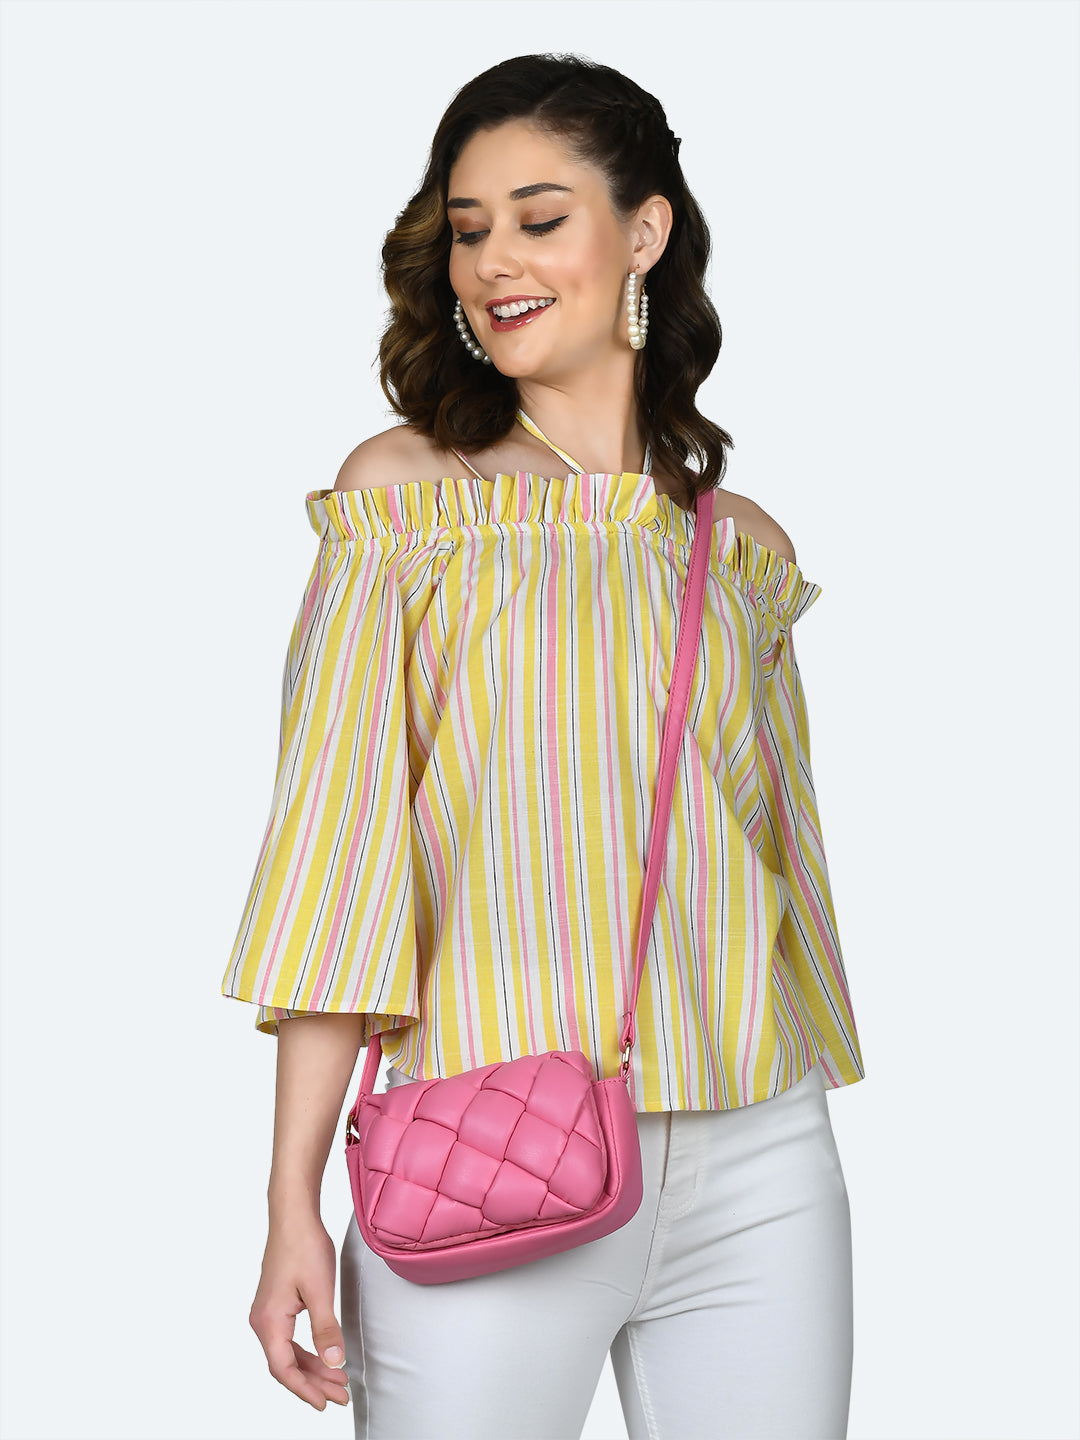 Multicolored Striped Offhoulder Top For Women